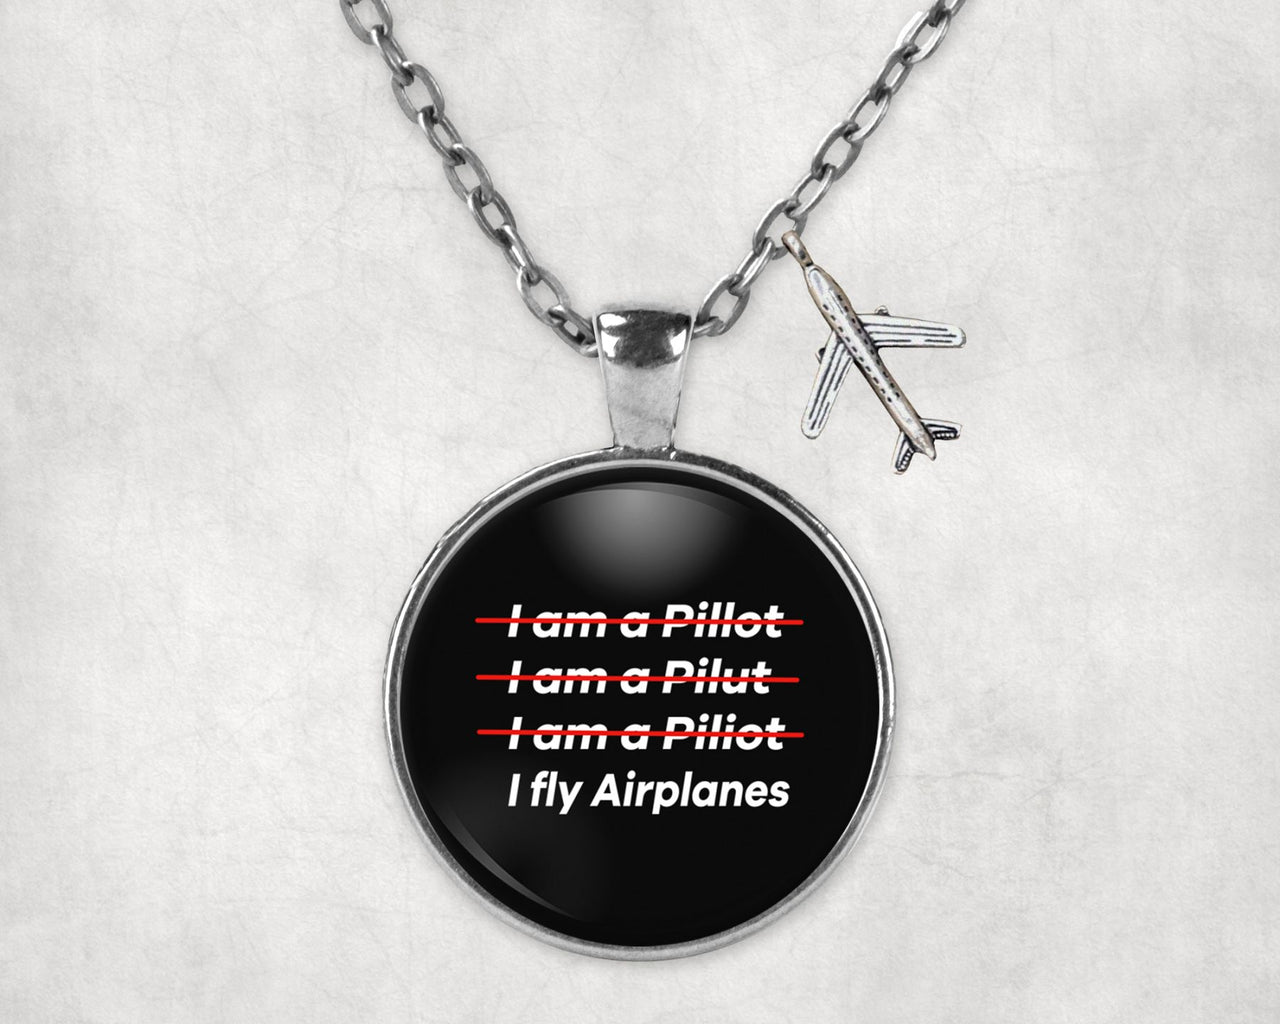 I Fly Airplanes Designed Necklaces